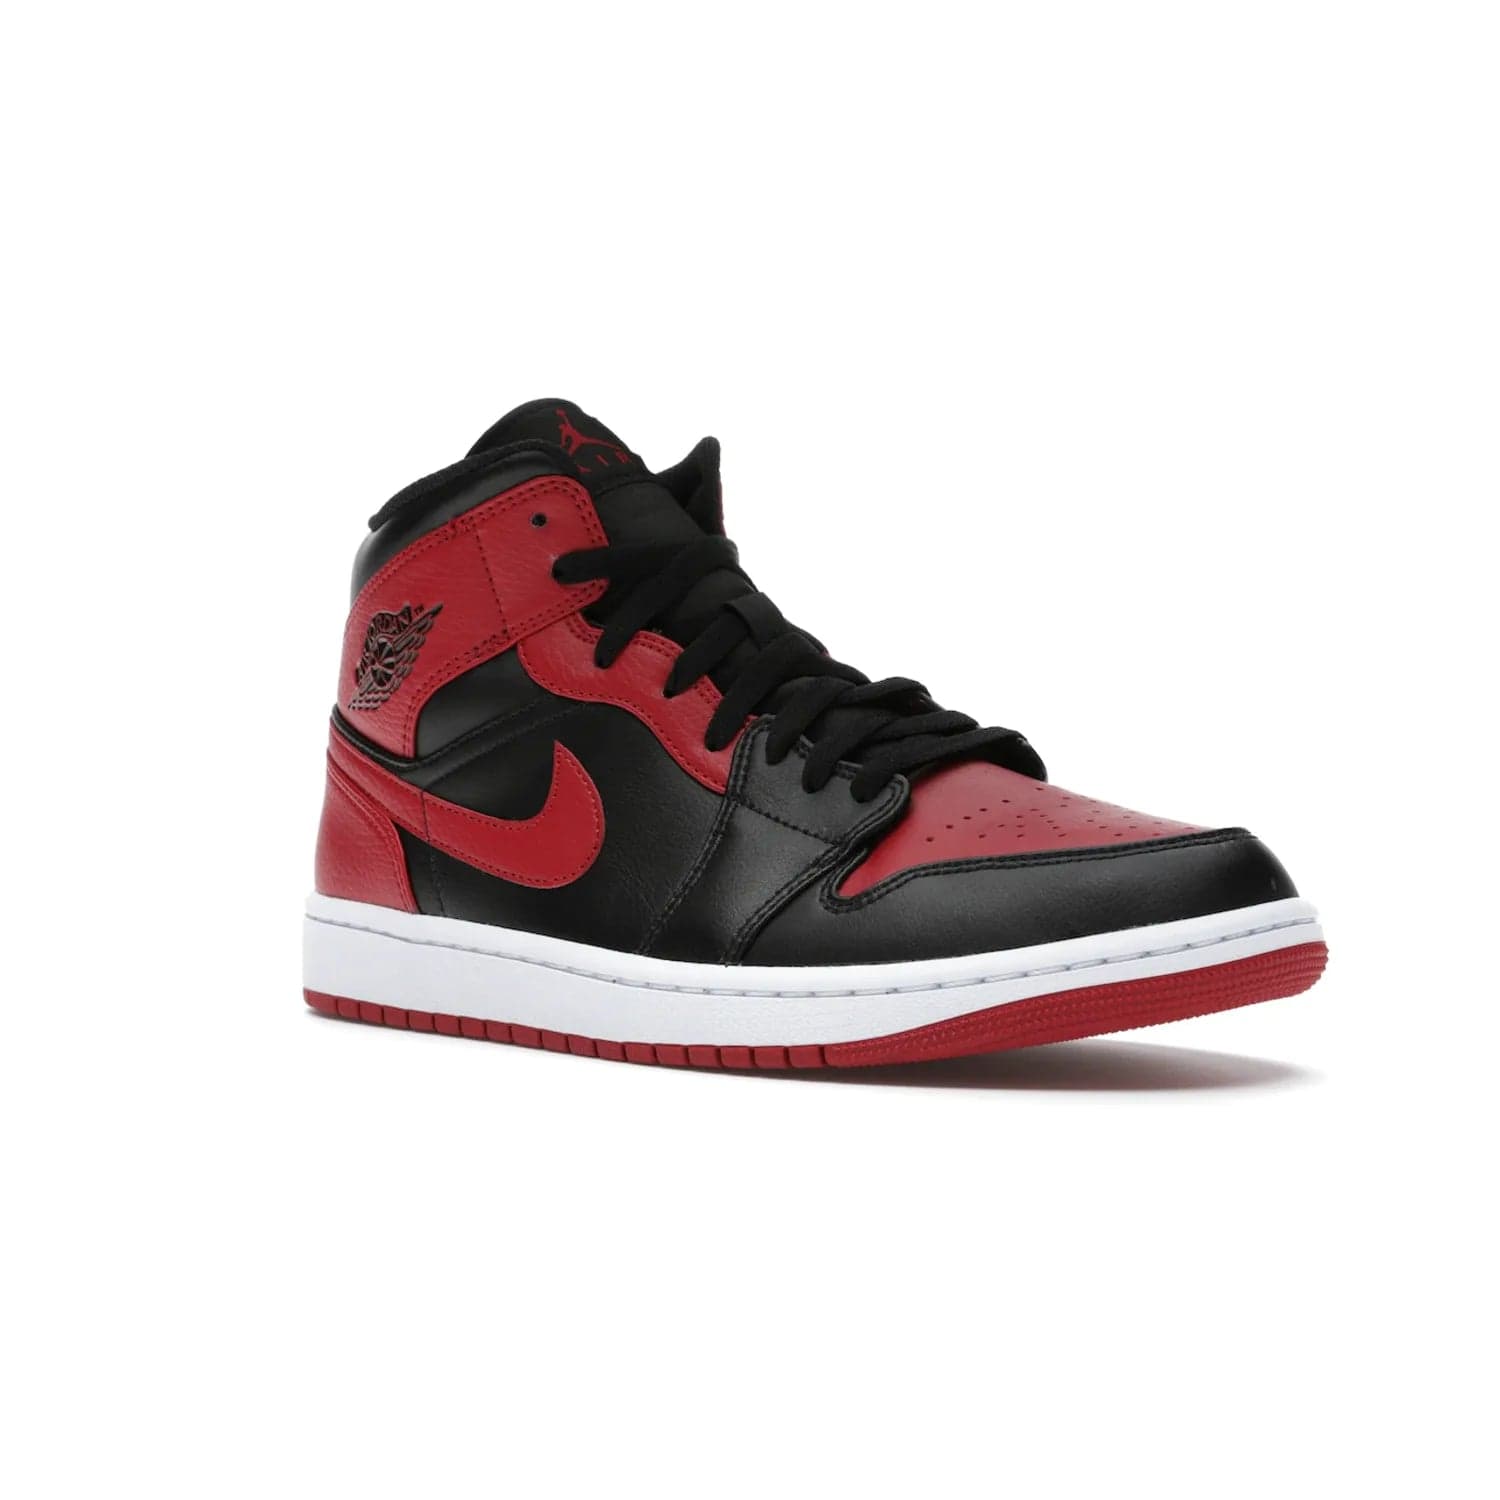 Jordan 1 Mid Banned (2020) - Image 5 - Only at www.BallersClubKickz.com - The Air Jordan 1 Mid Banned (2020) brings a modern twist to the classic Banned colorway. Features full-grain black and red leather uppers, red leather around the toe, collar, heel, & Swoosh. Release November 2021 for $110.